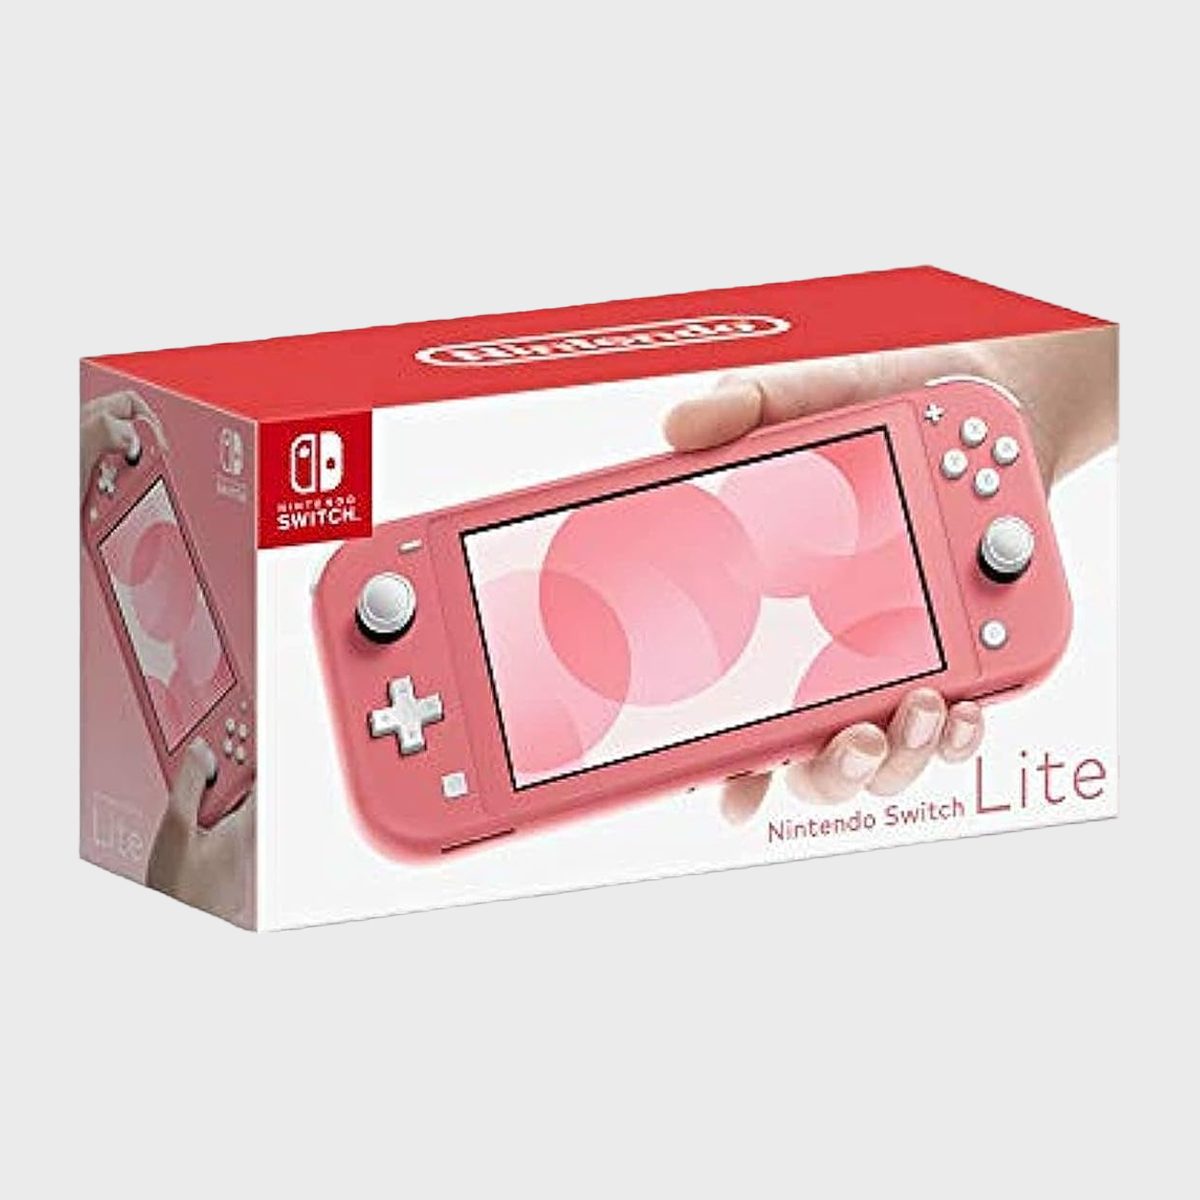 <p>Whether she's six or 16, a <a href="https://www.amazon.com/Nintendo-Switch-Lite-Coral/dp/B084Y3VVNG" rel="noopener noreferrer">Nintendo Switch Lite</a> is the perfect gift for gamer girls. This cool tech gift comes in three different colors and, unlike its bigger cousin, is exclusively designed for handheld play. But don't let that deter you. This console offers the same swift, exciting gaming and bright colors. Plus, its slim, lightweight design makes it easy to take on the go.</p> <p class="listicle-page__cta-button-shop"><a class="shop-btn" href="https://www.amazon.com/Nintendo-Switch-Lite-Coral/dp/B084Y3VVNG/">Shop Now</a></p>